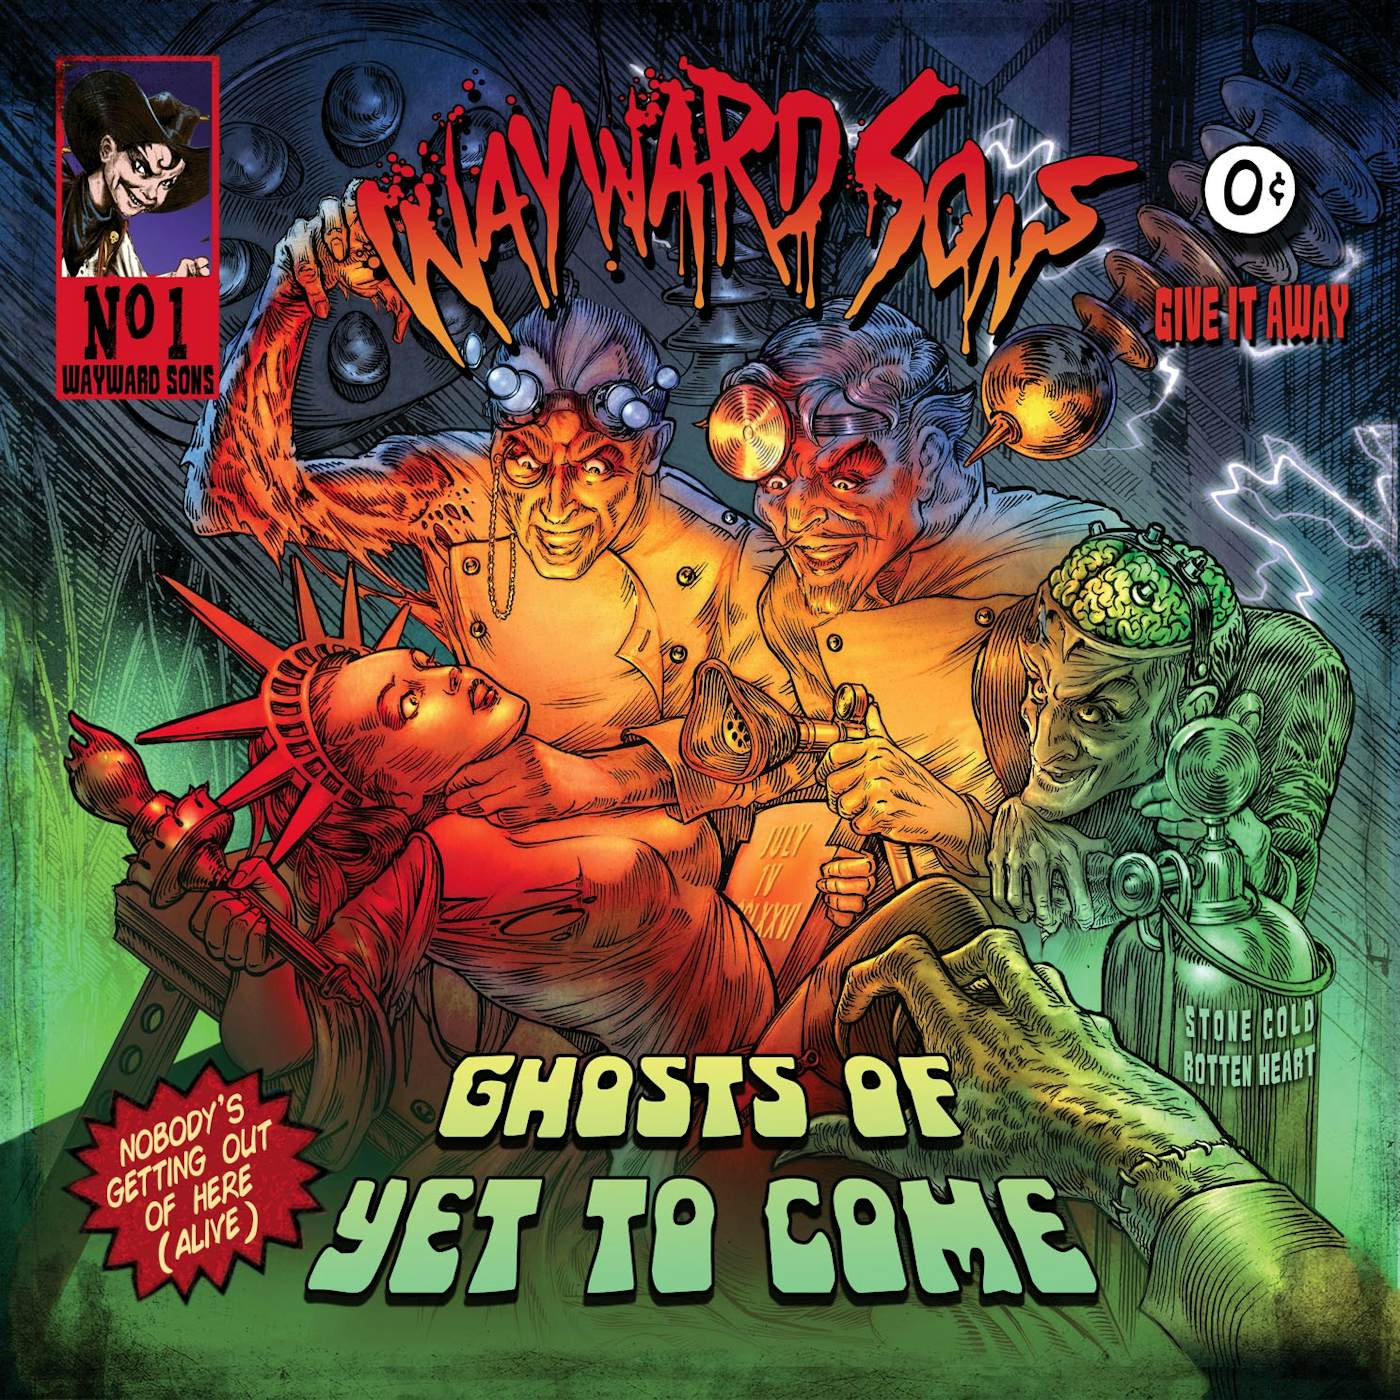 Wayward Sons Ghosts of yet to Come Vinyl Record